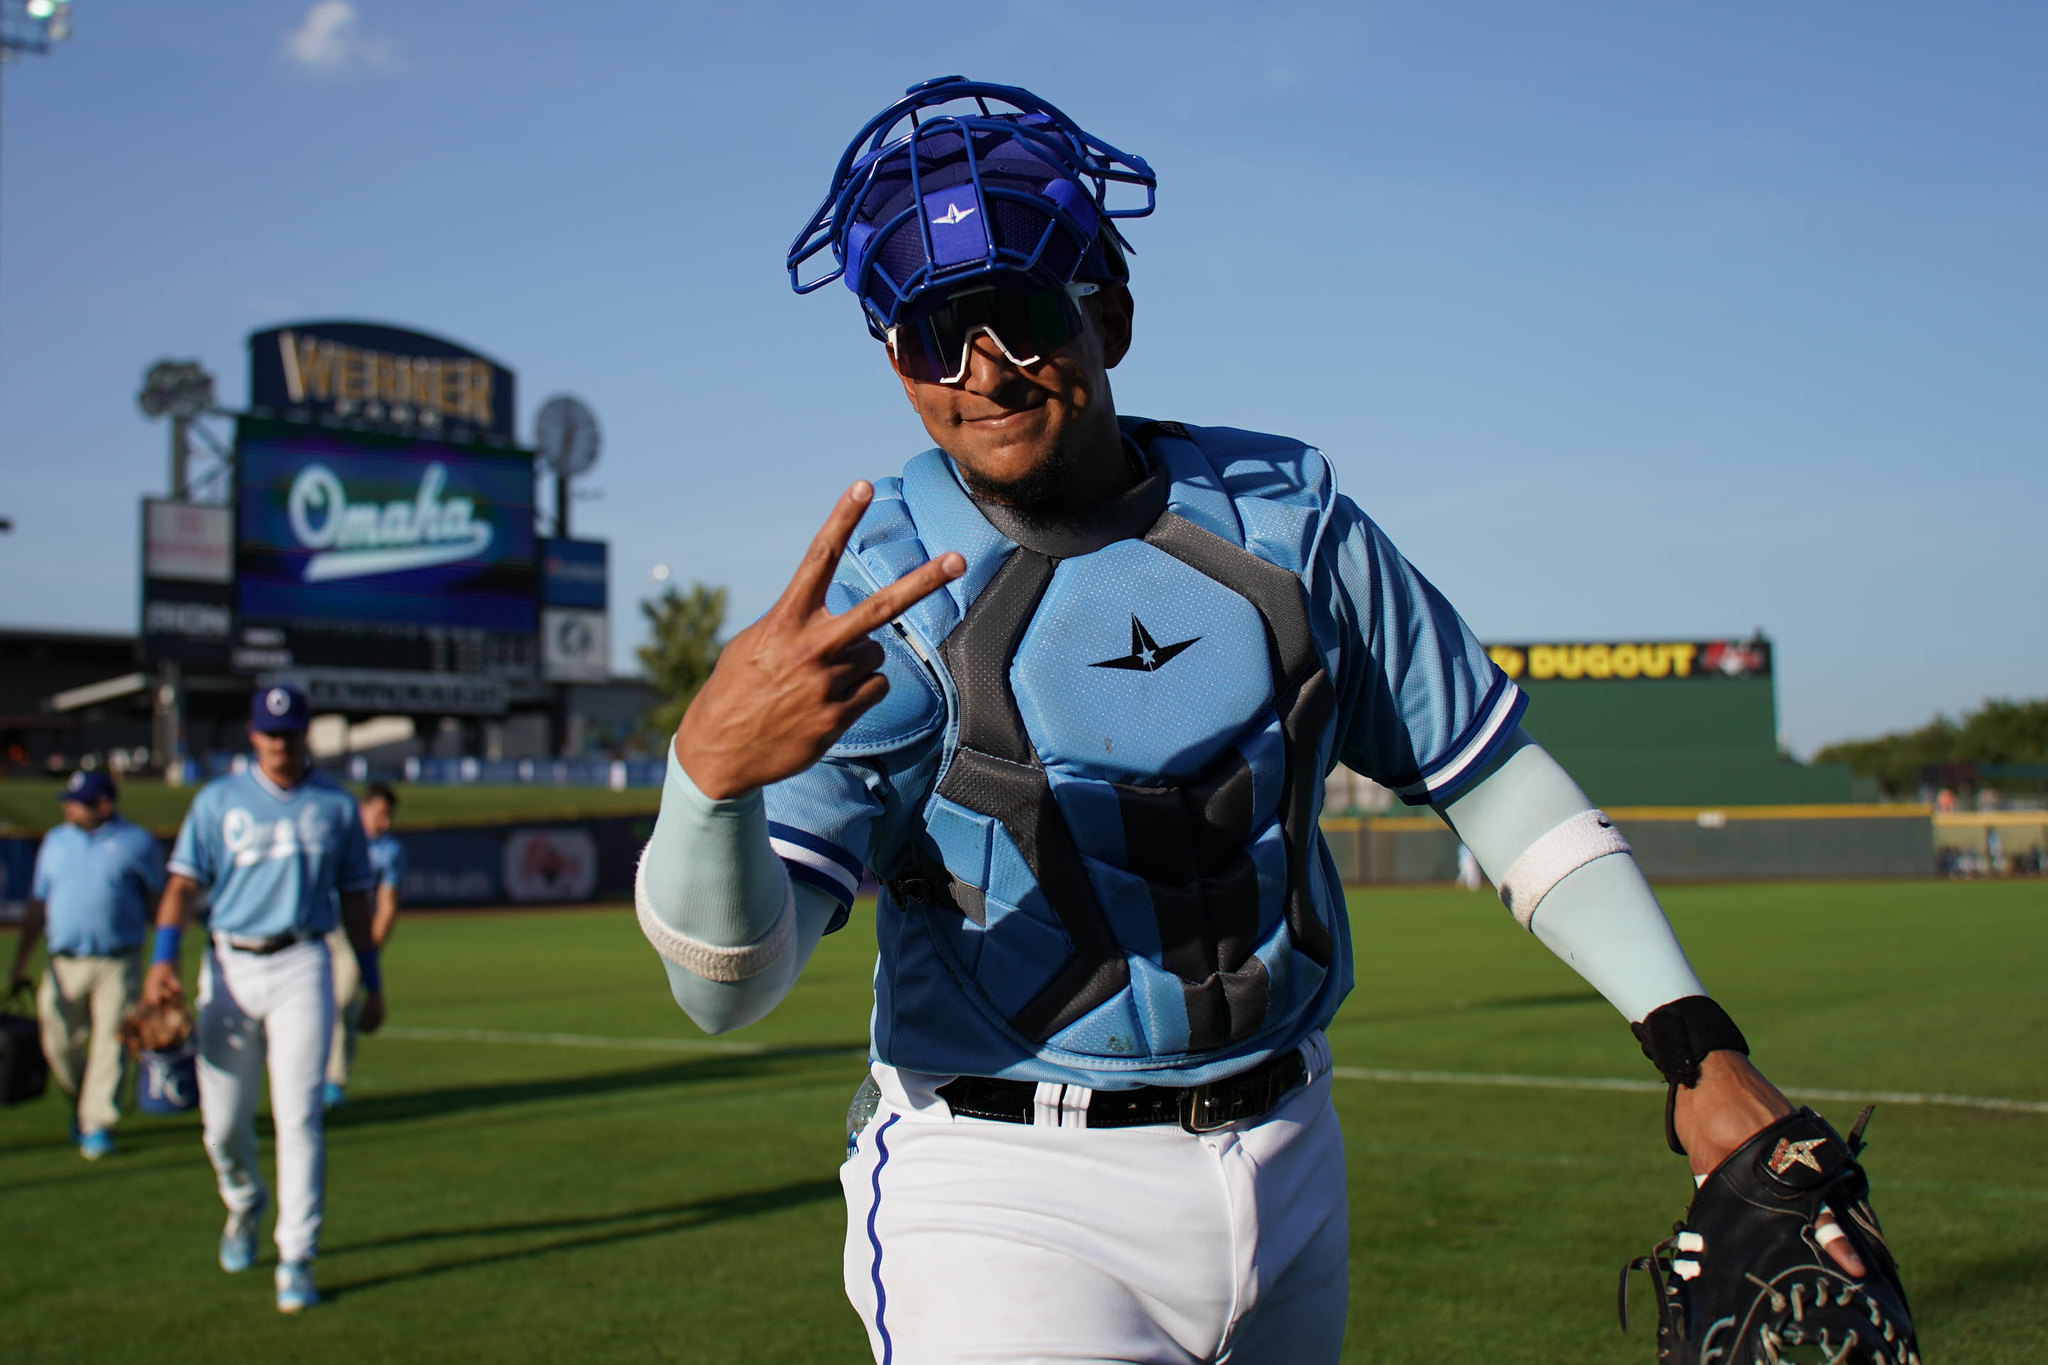 A catcher in light blue and gray chest protector gives a peace sign as he walks on a baseball field.